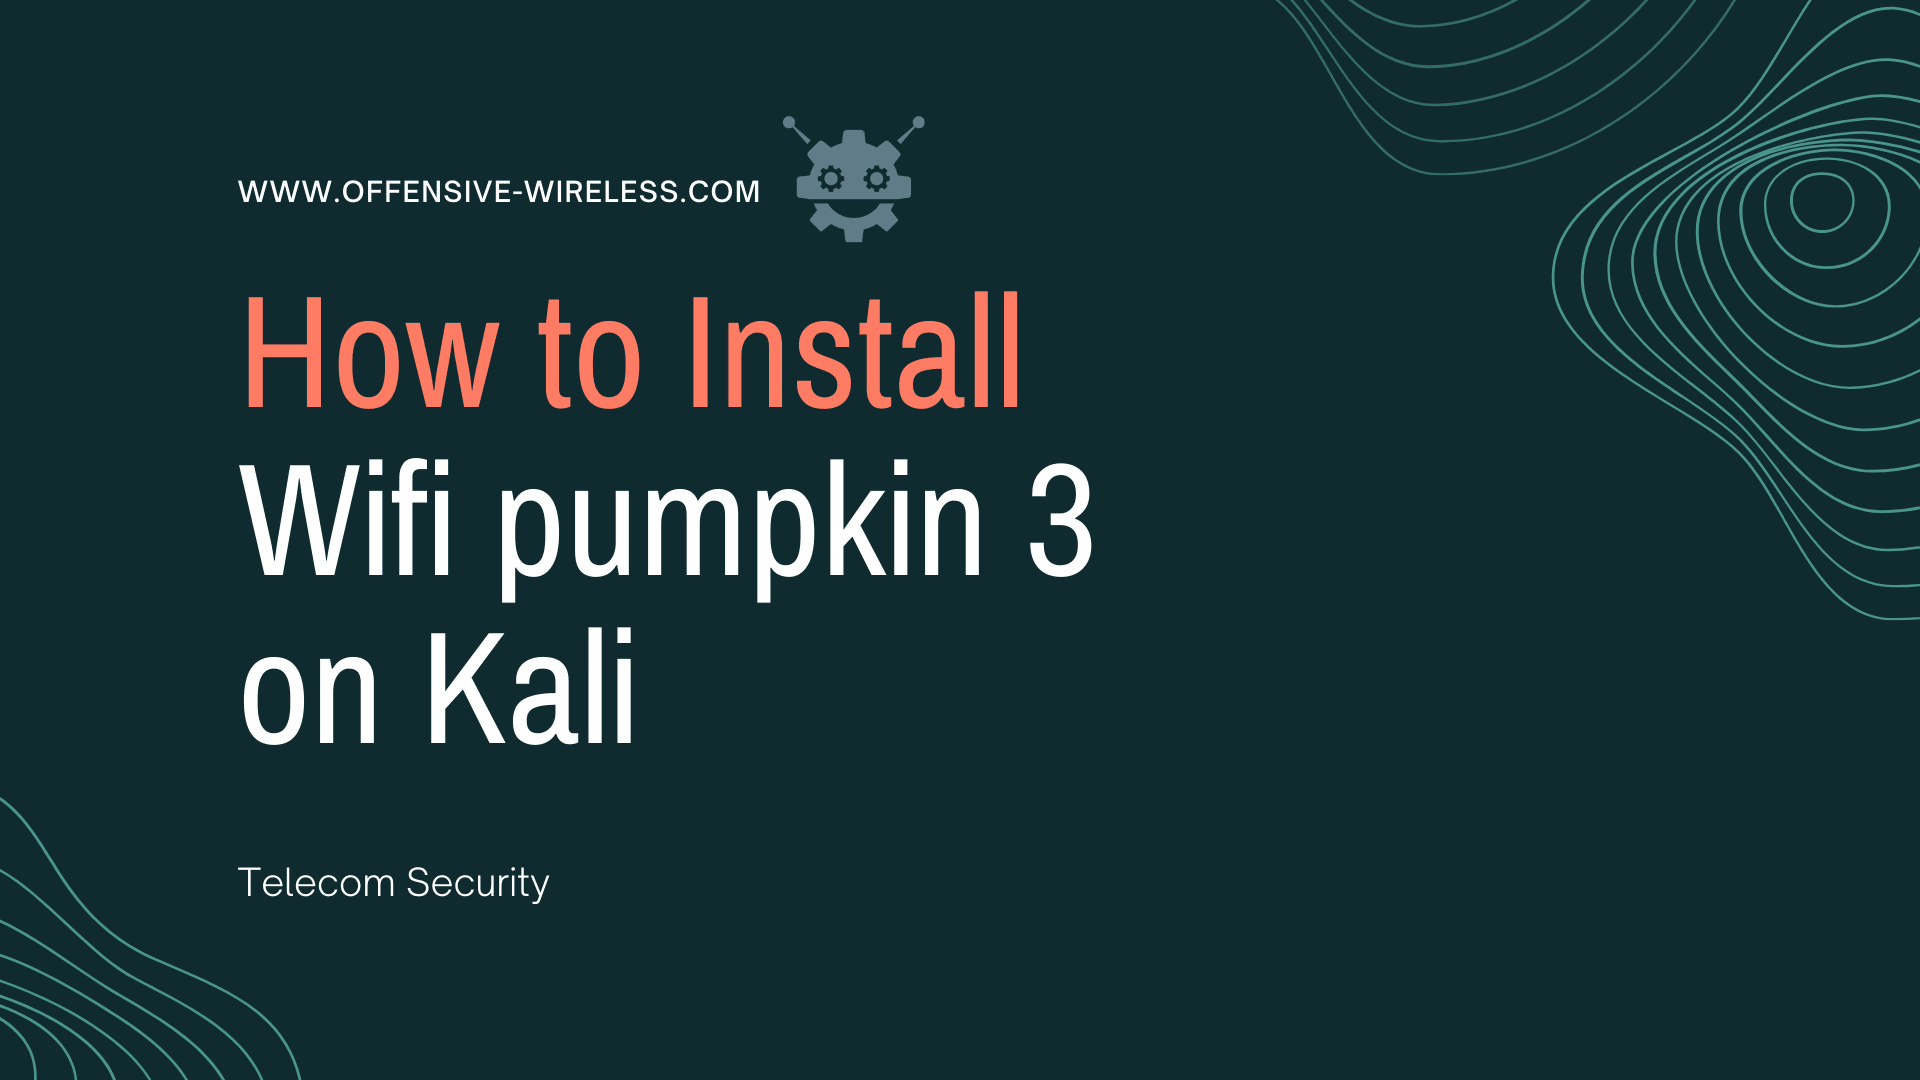 How to Install Wifipumpkin3 on Kali Linux